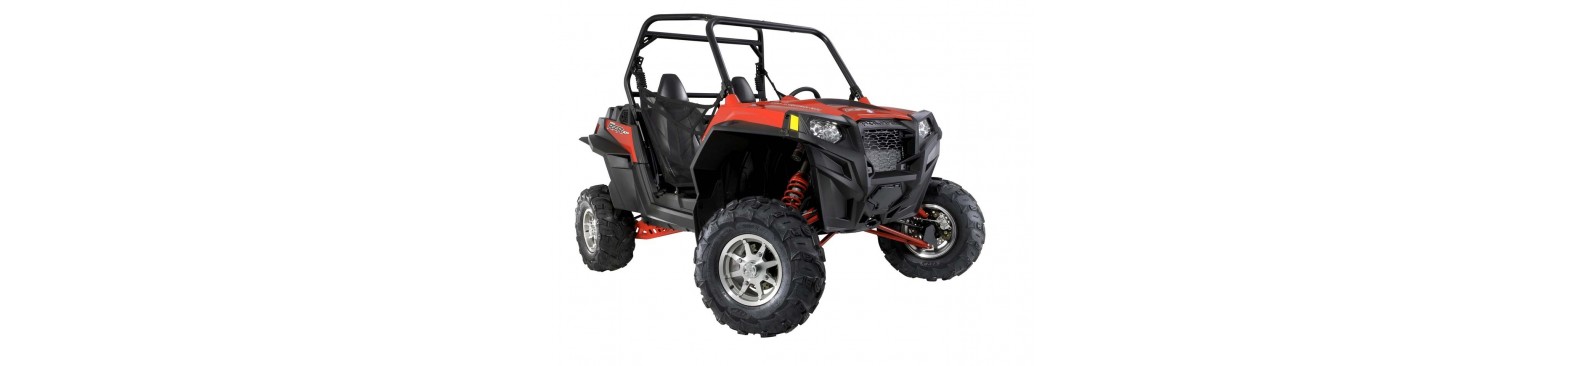 Polaris RZR XP900 Replacement parts and accessories page